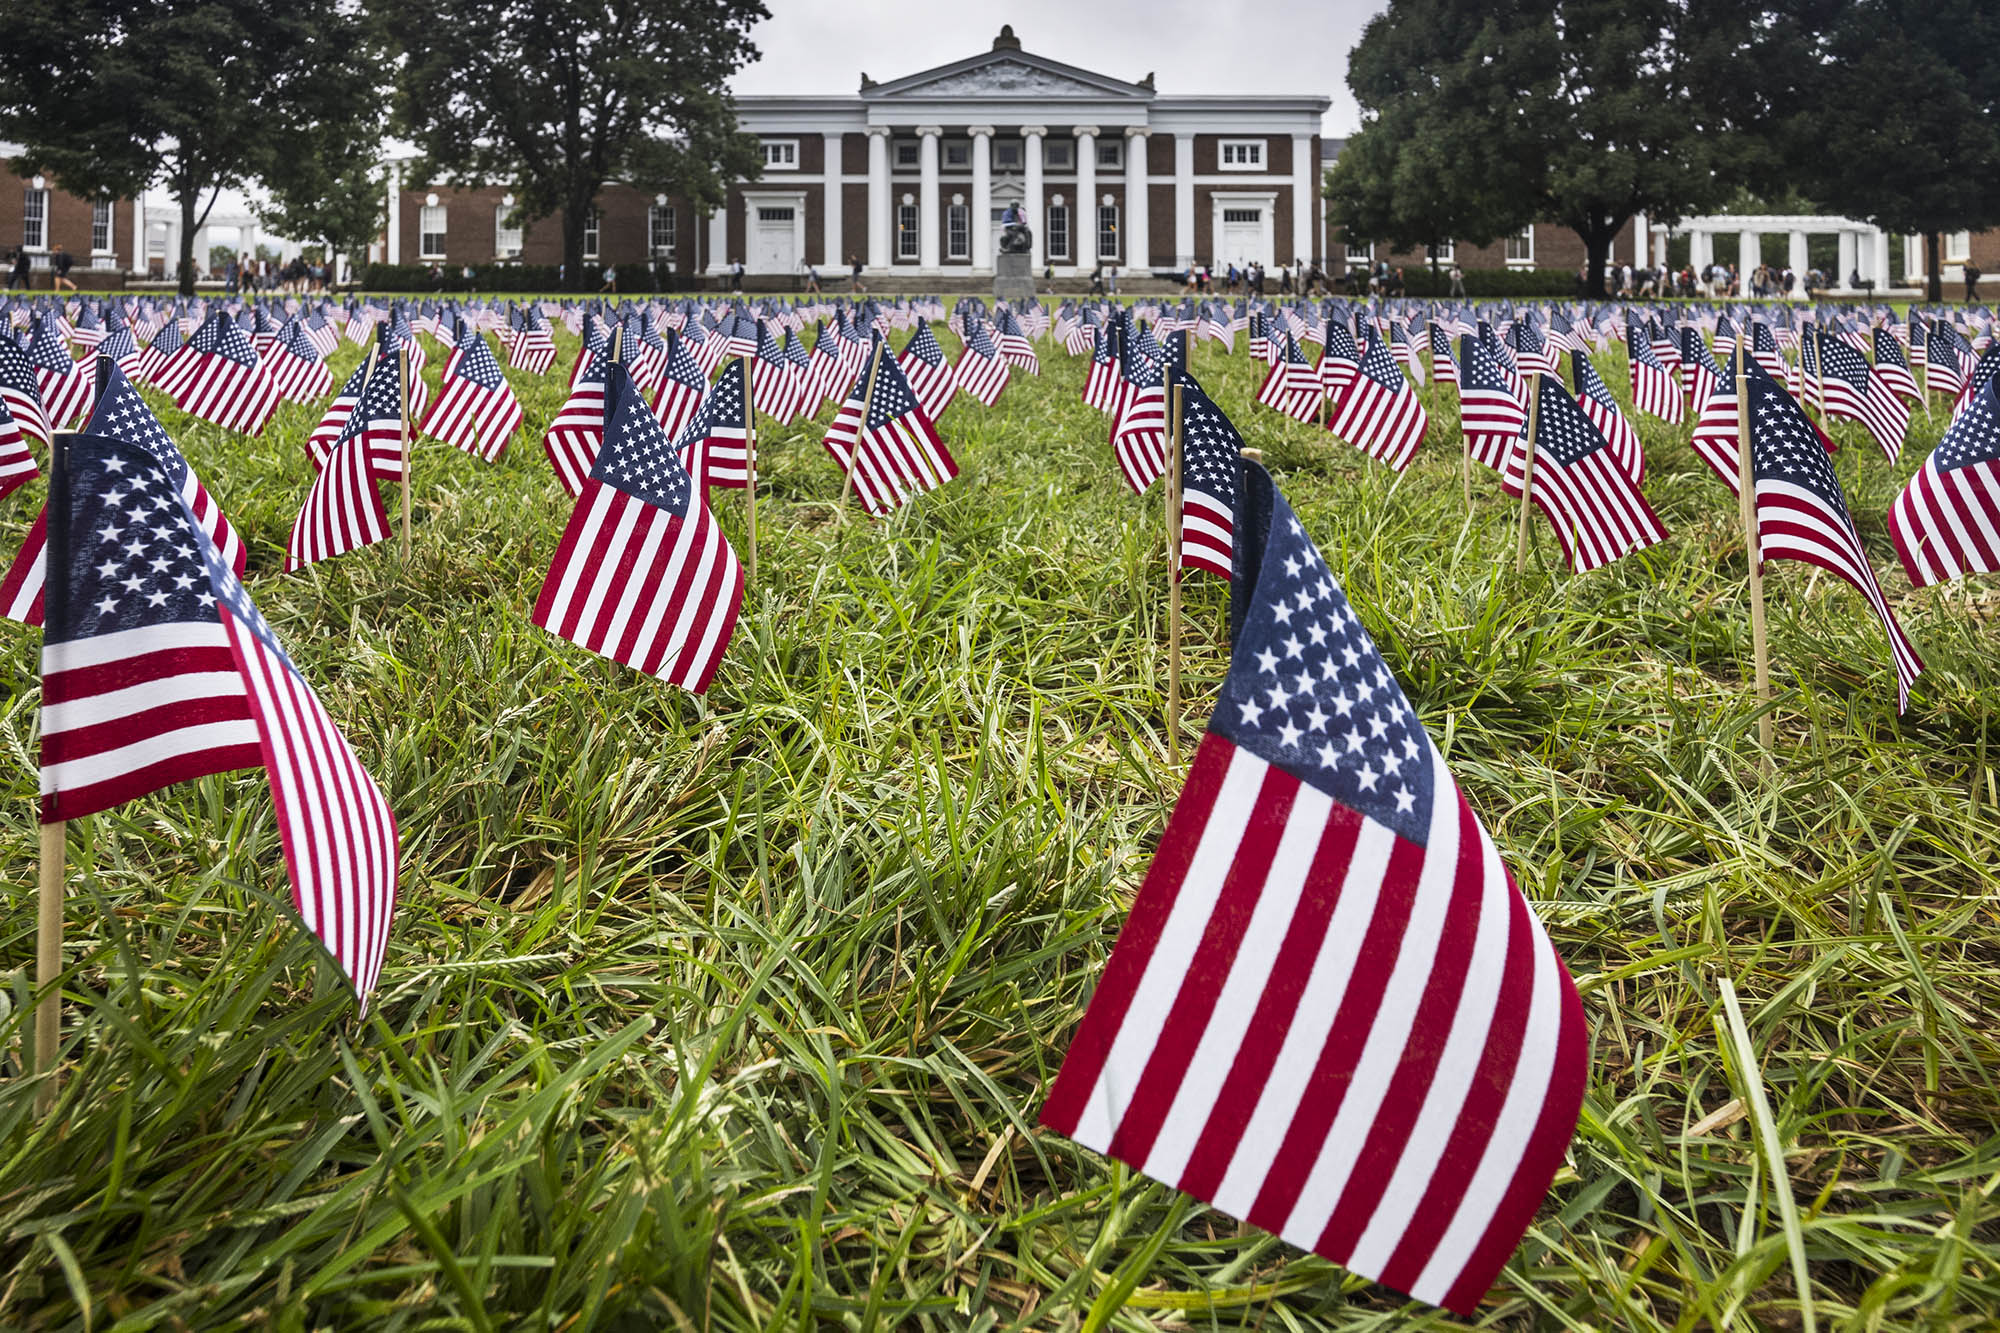 The Lawn covered in American Flags